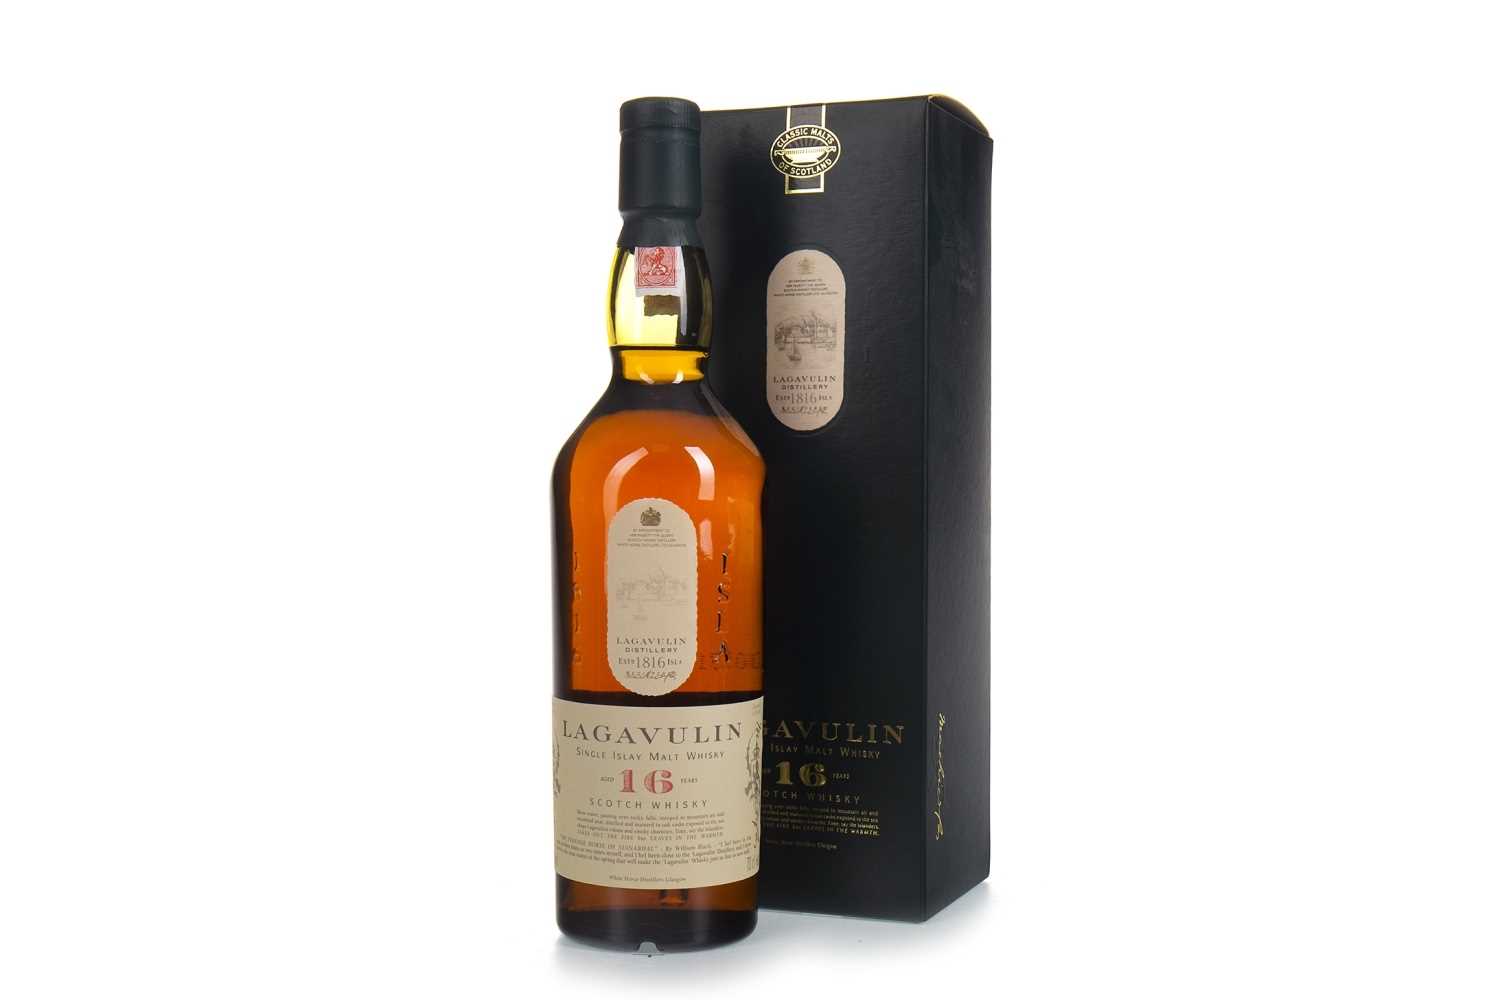 Lot 99 - LAGAVULIN 16 YEARS OLD WHITE HORSE DISTILLERS